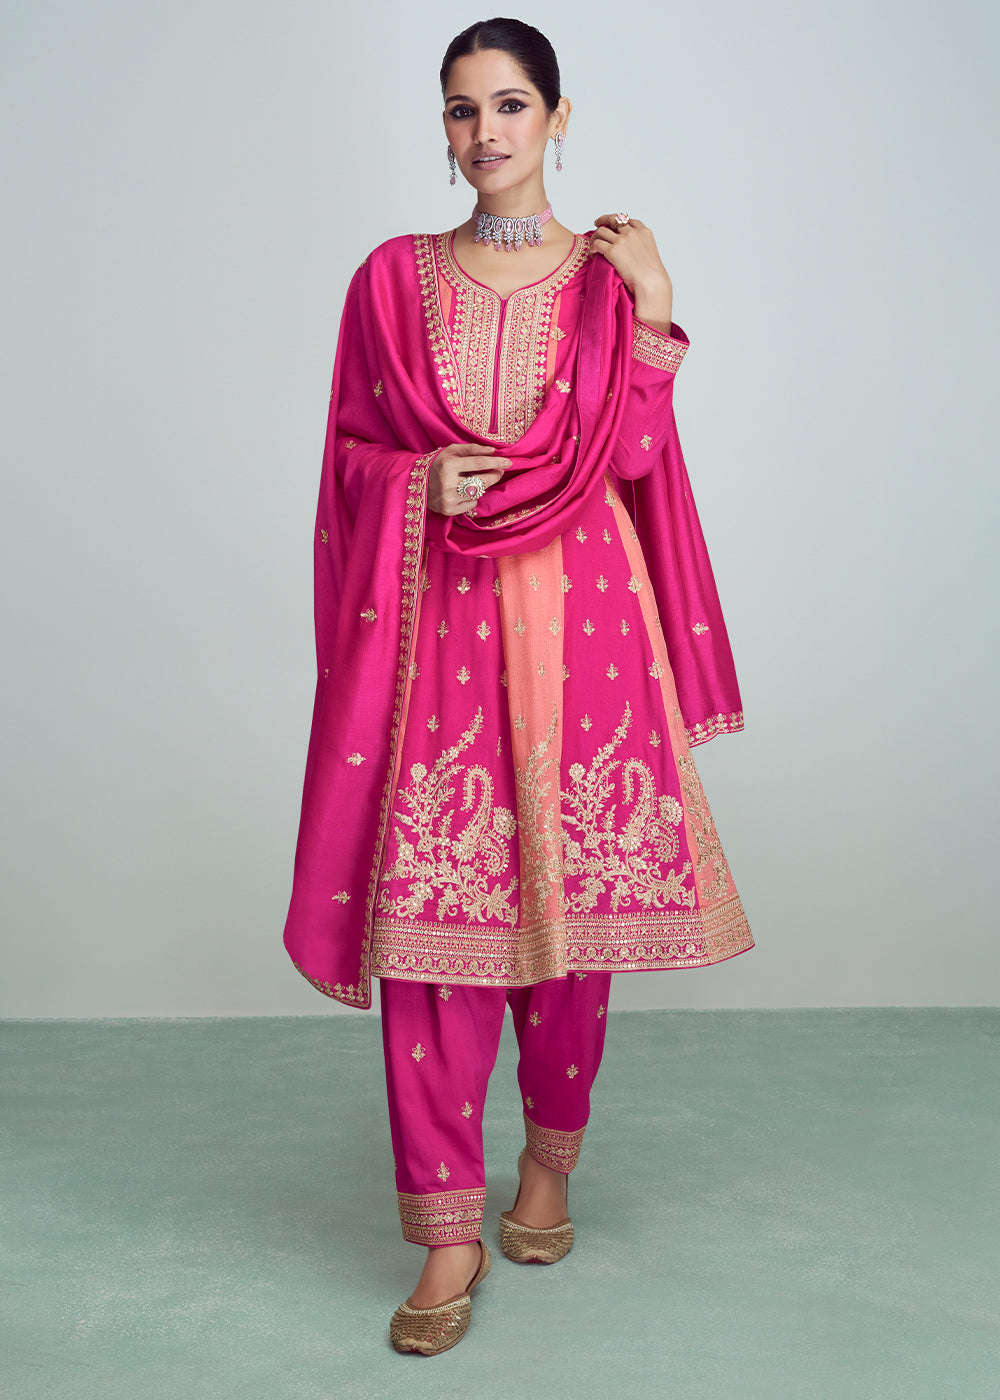 Shades Of Pink Embroidered Silk Salwar Suit By Qivii